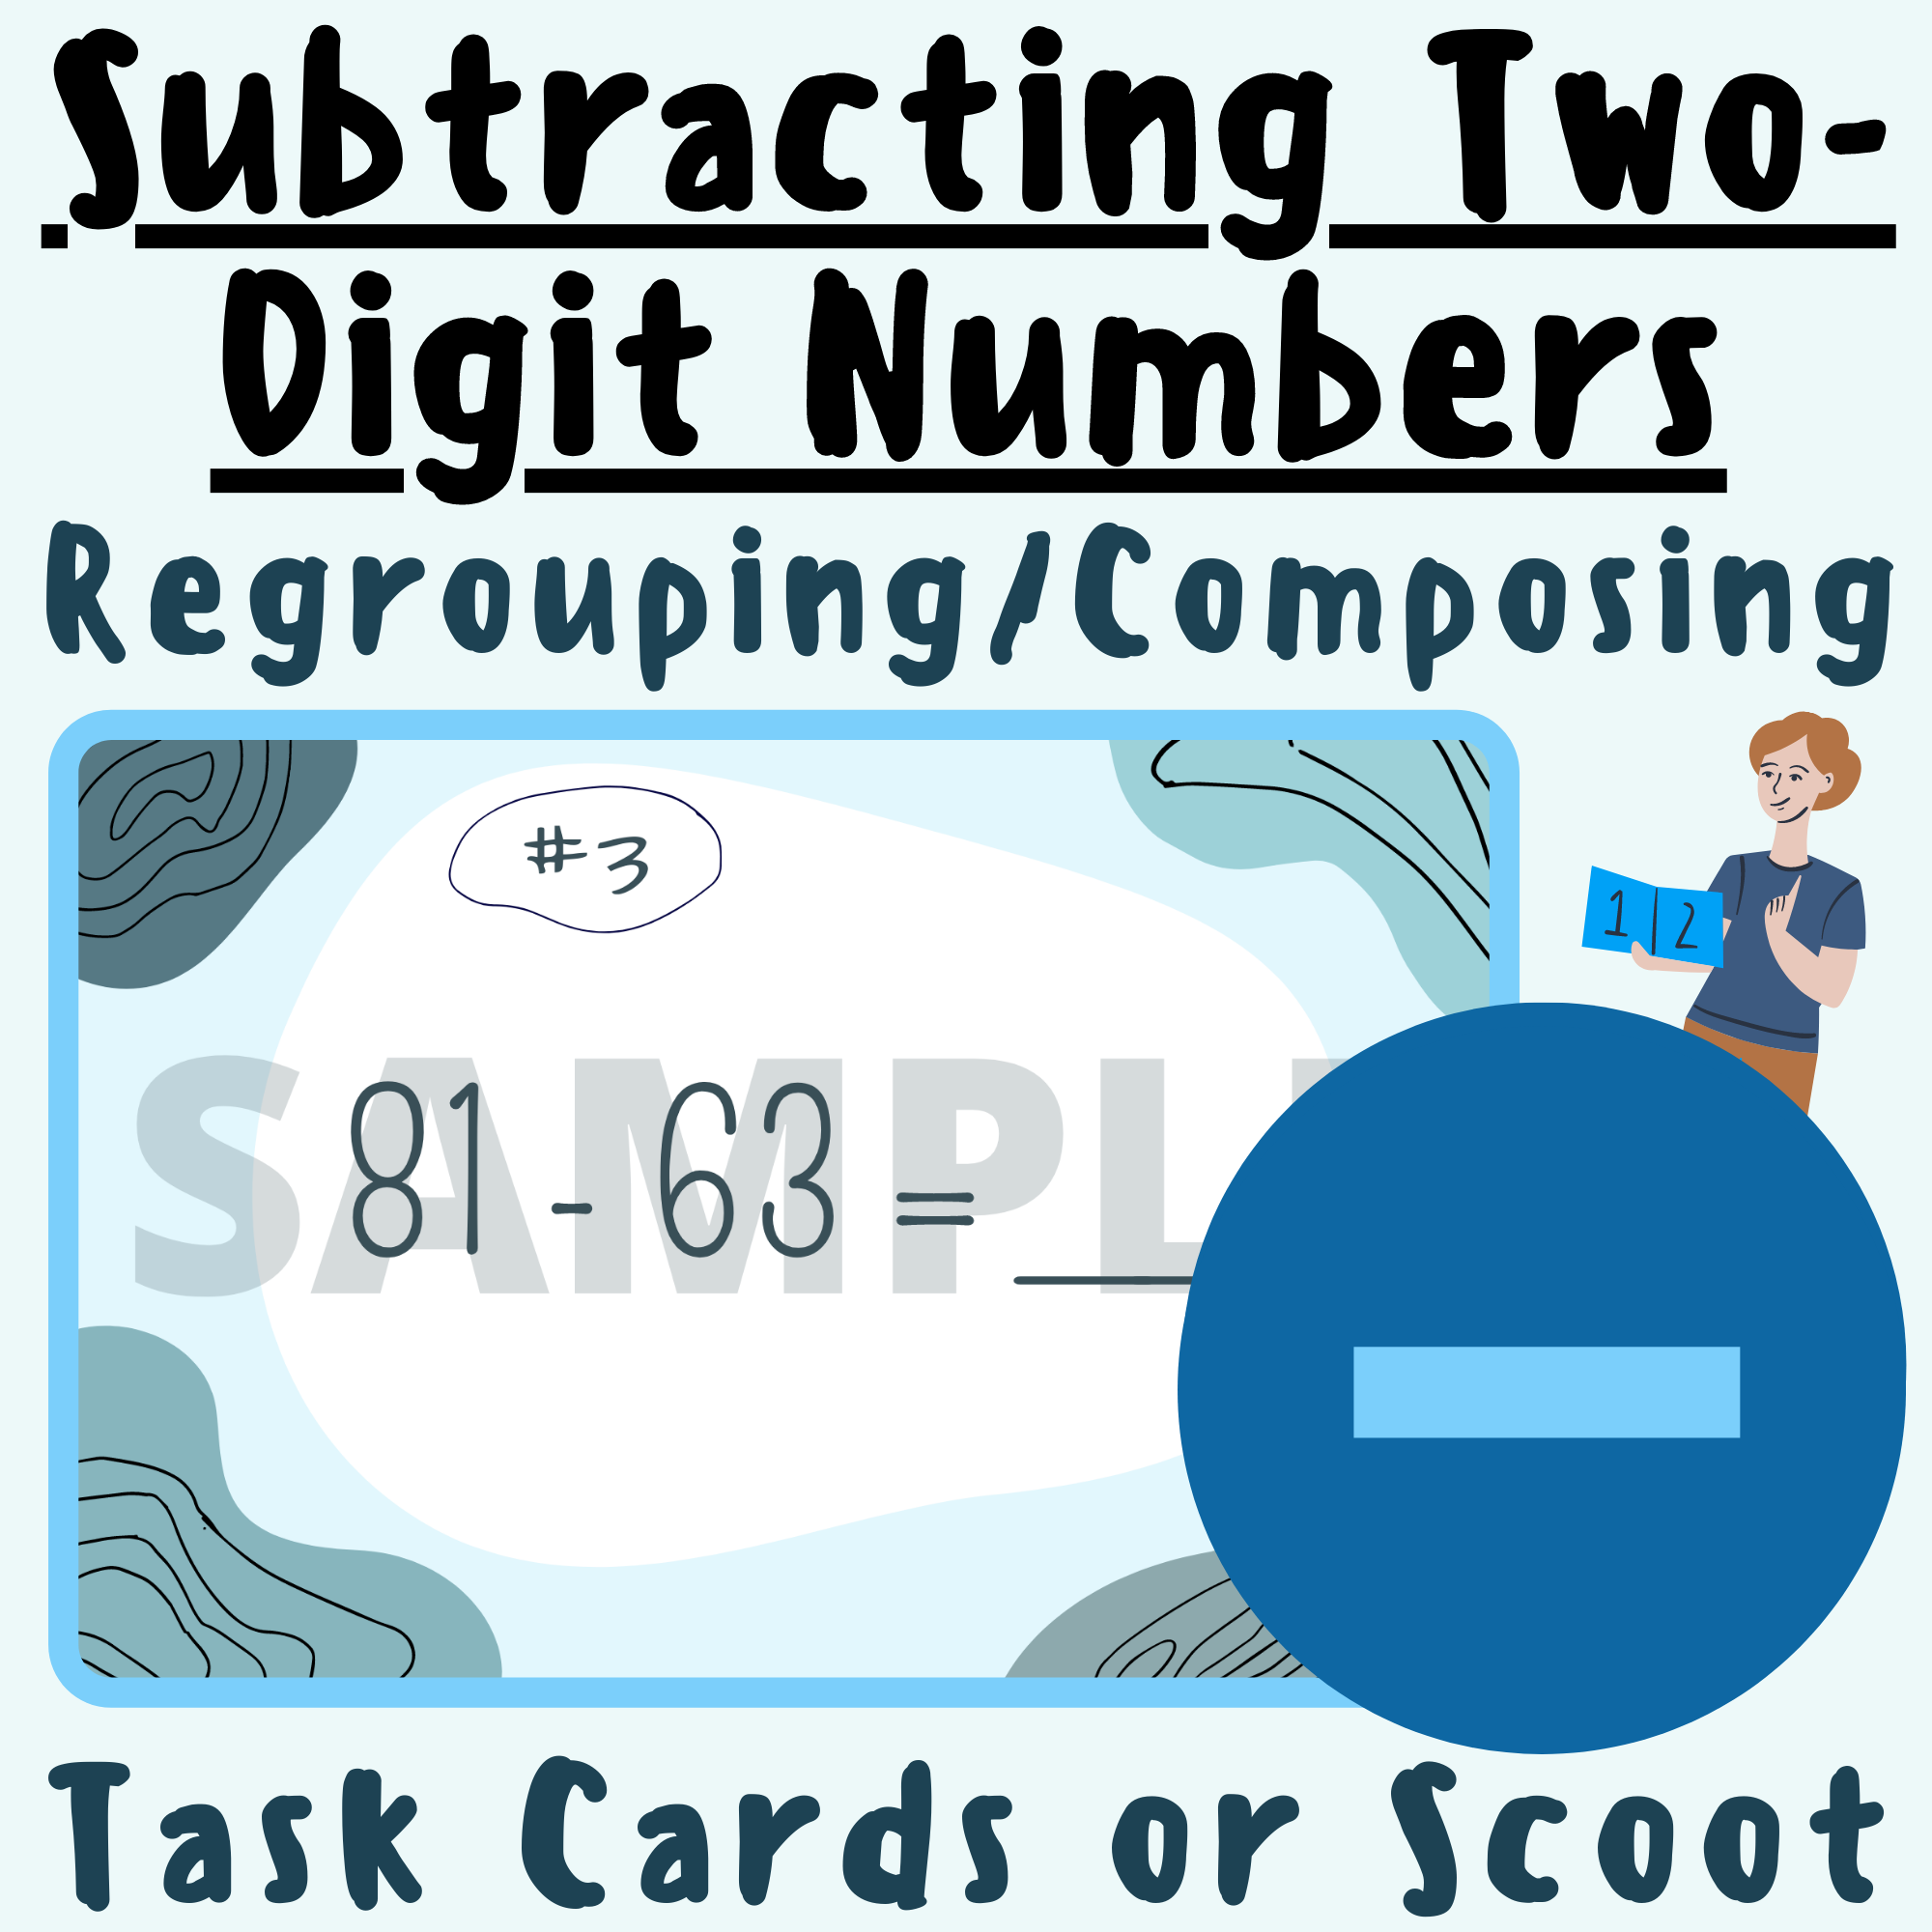 Subtracting Two-Digit Numbers With Regrouping and Composing SCOOT or TASK CARDS; For K-5 Teachers and Students in the Math Classroom